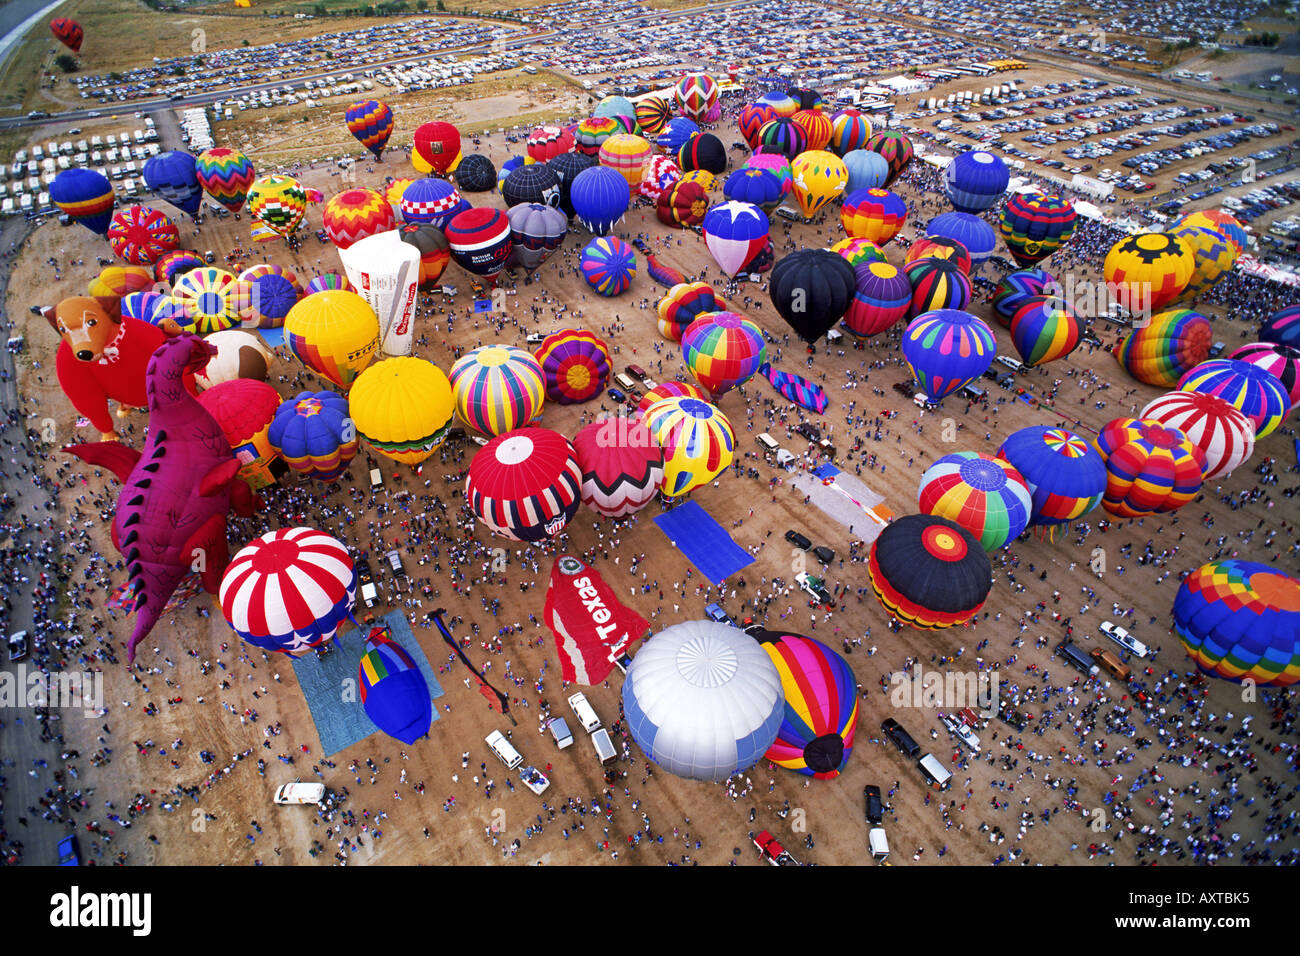 Overview of liftoff at Albuquerque balloon festival in New Mexico Stock Photo